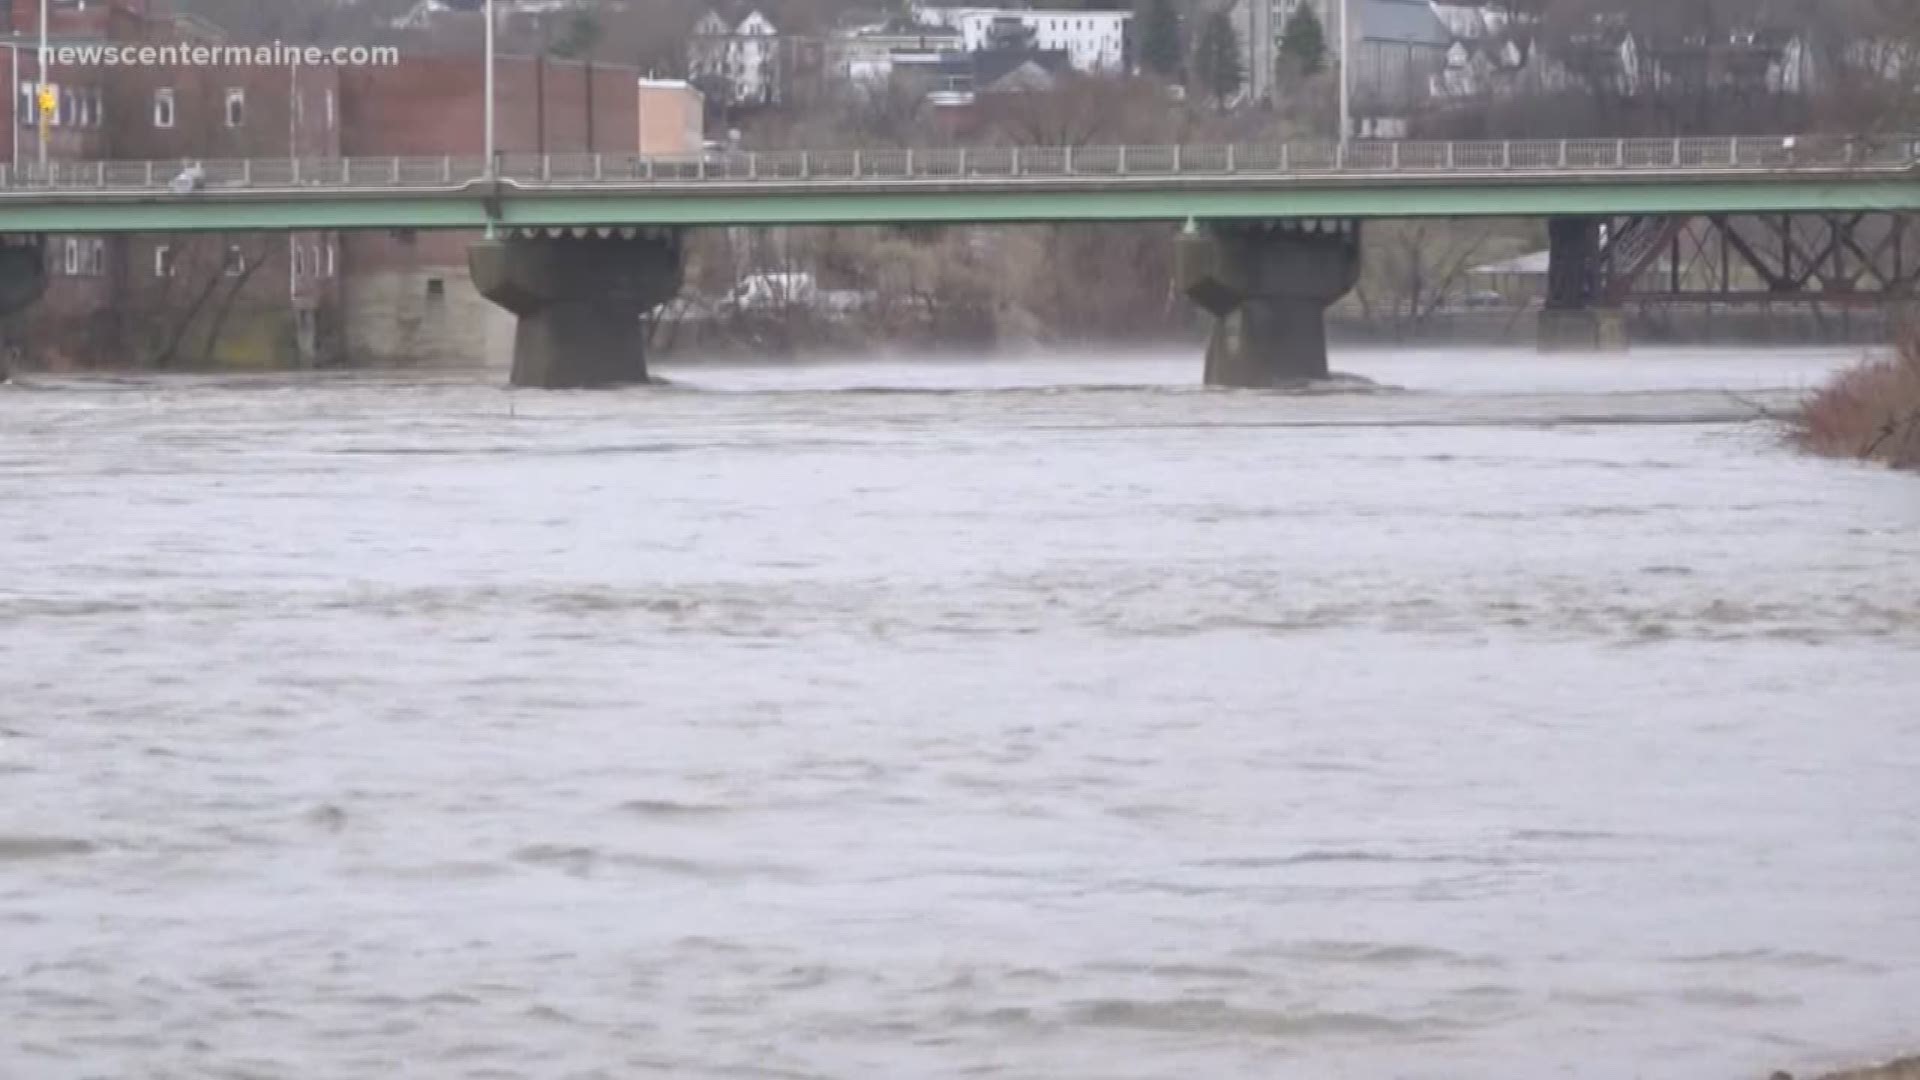 Flood waters rise across the state.